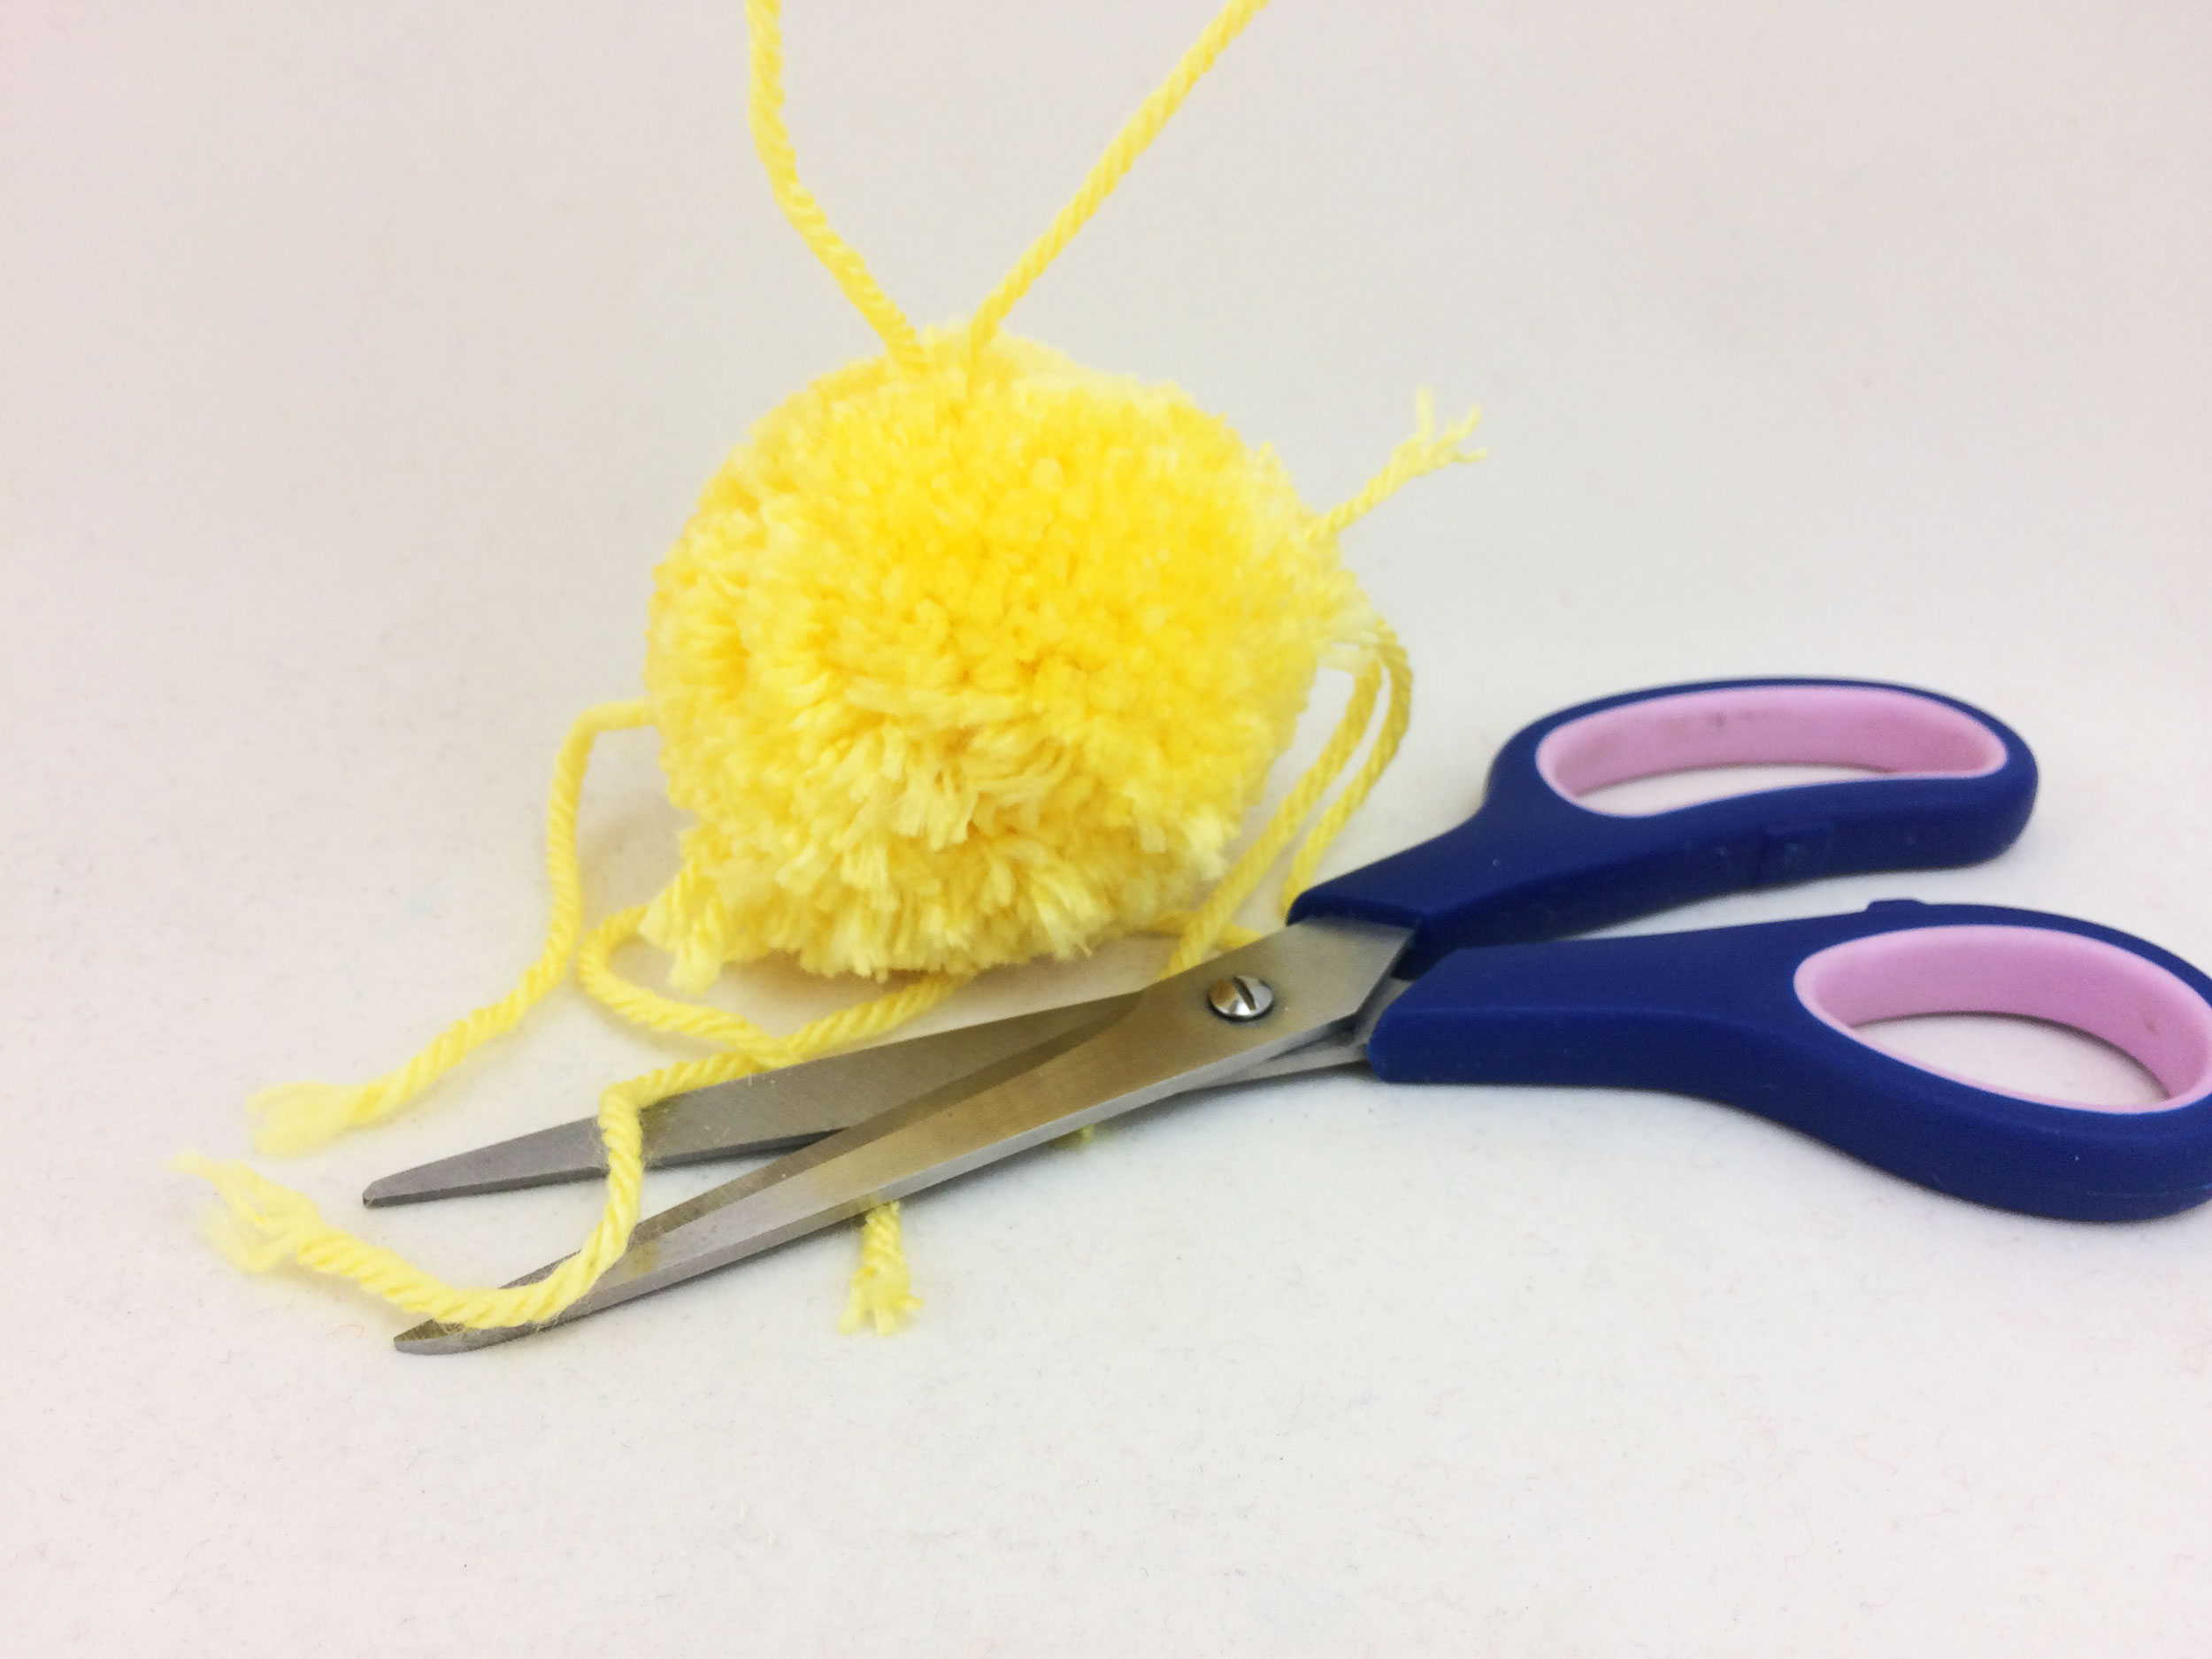 Trim excess strings from pom poms and tie loop for DIY Easter Chick Ornament. | OrnamentShop.com